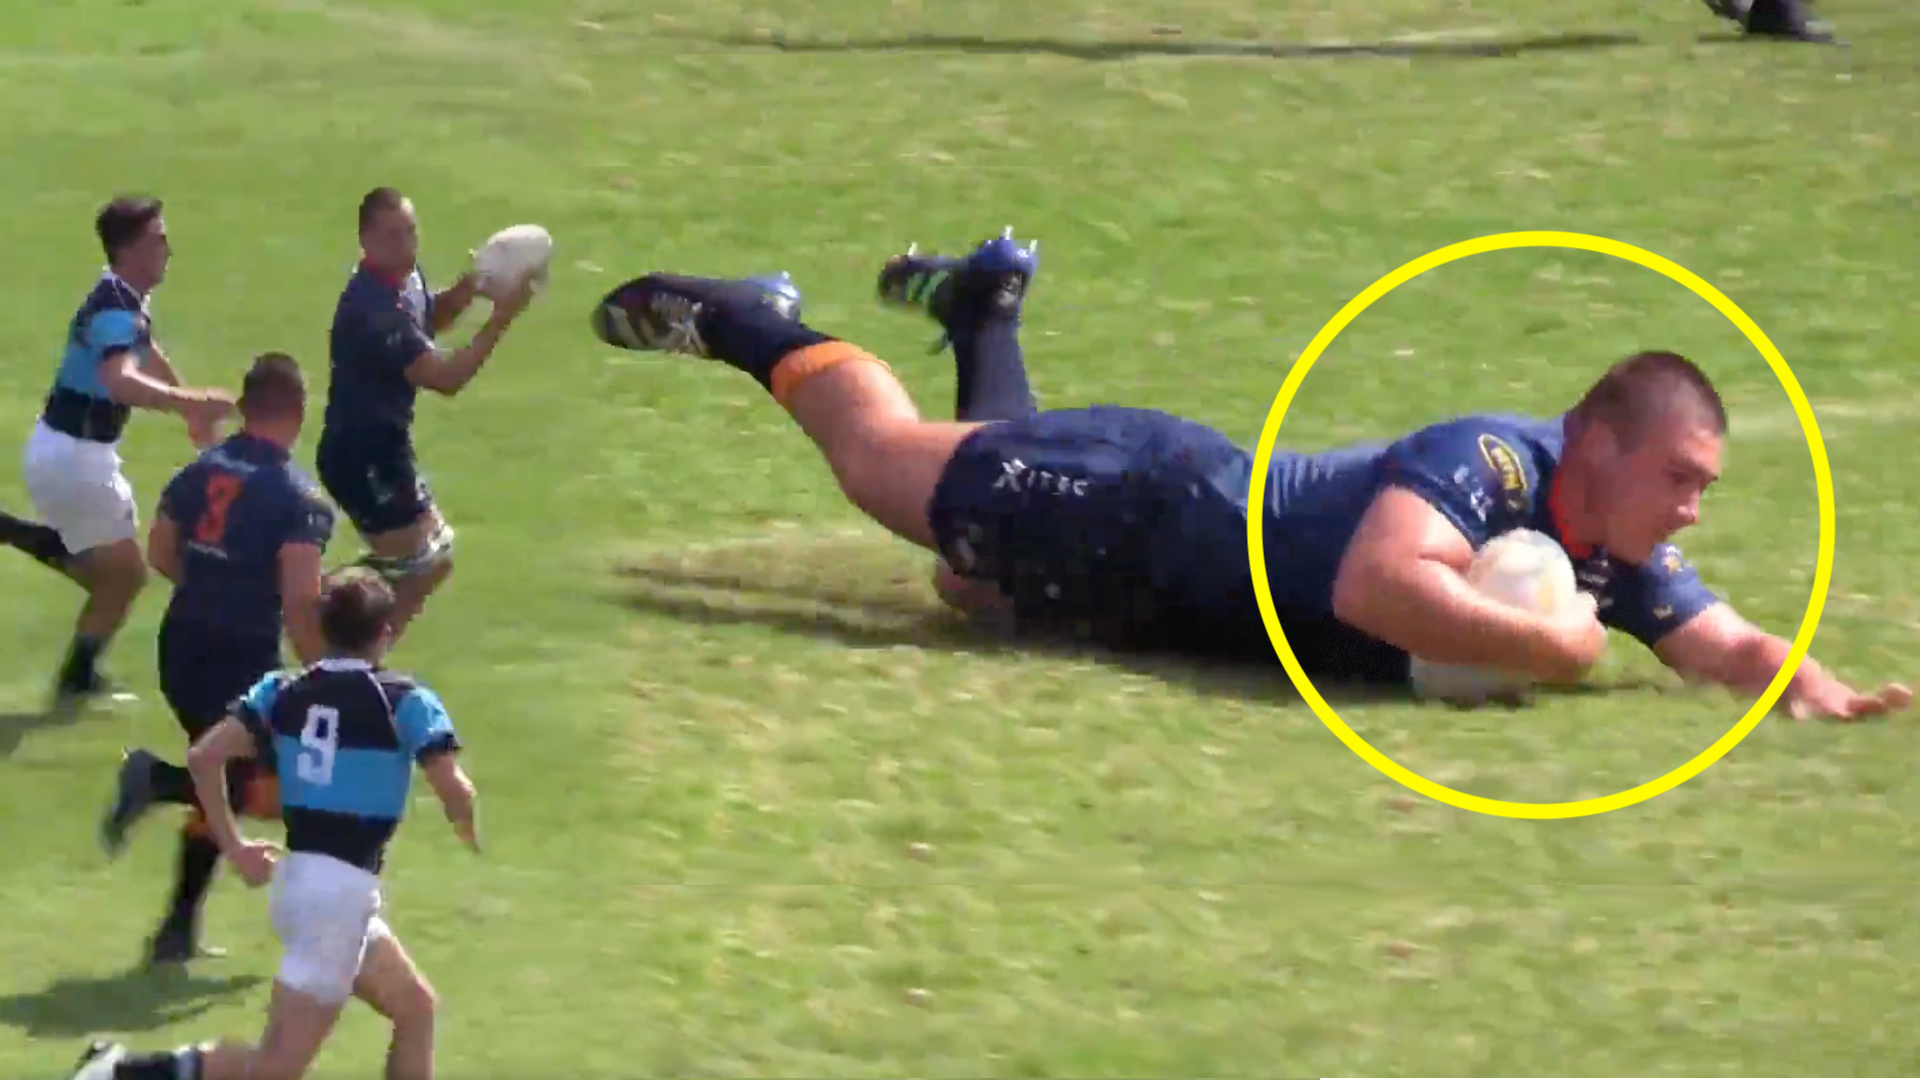 Prop and flanker are latest South African schoolboys to go viral with epic try